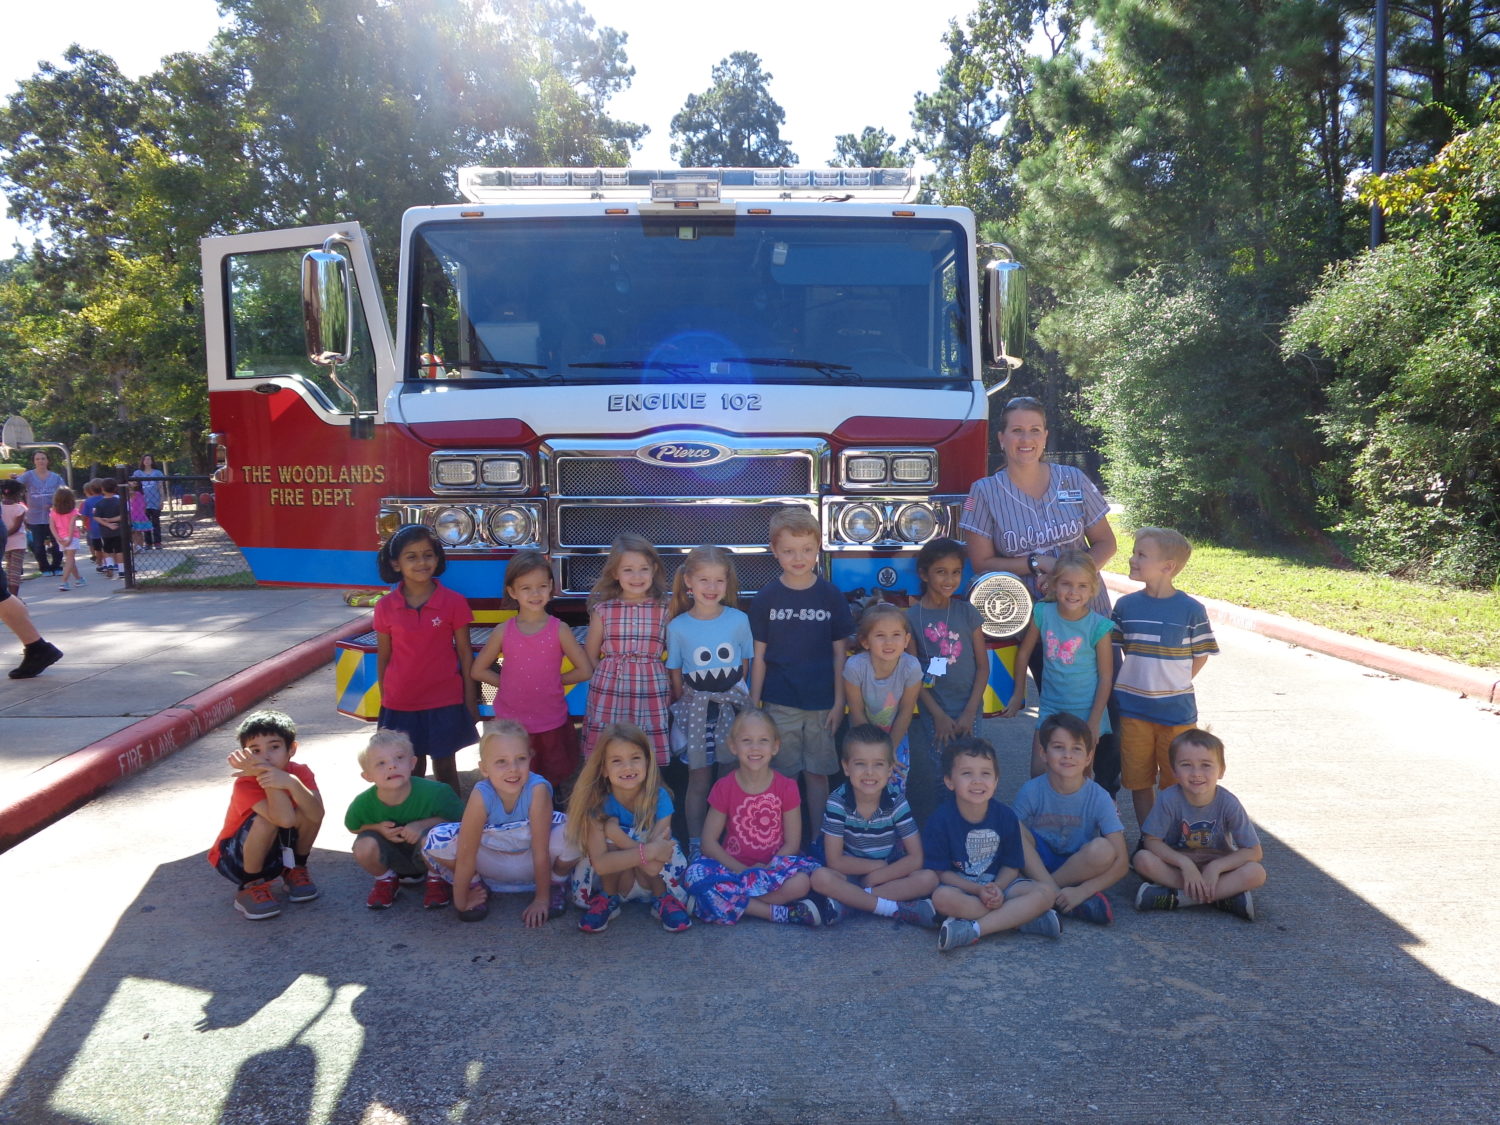 David kindergarten students enjoyed learning about fire safety.